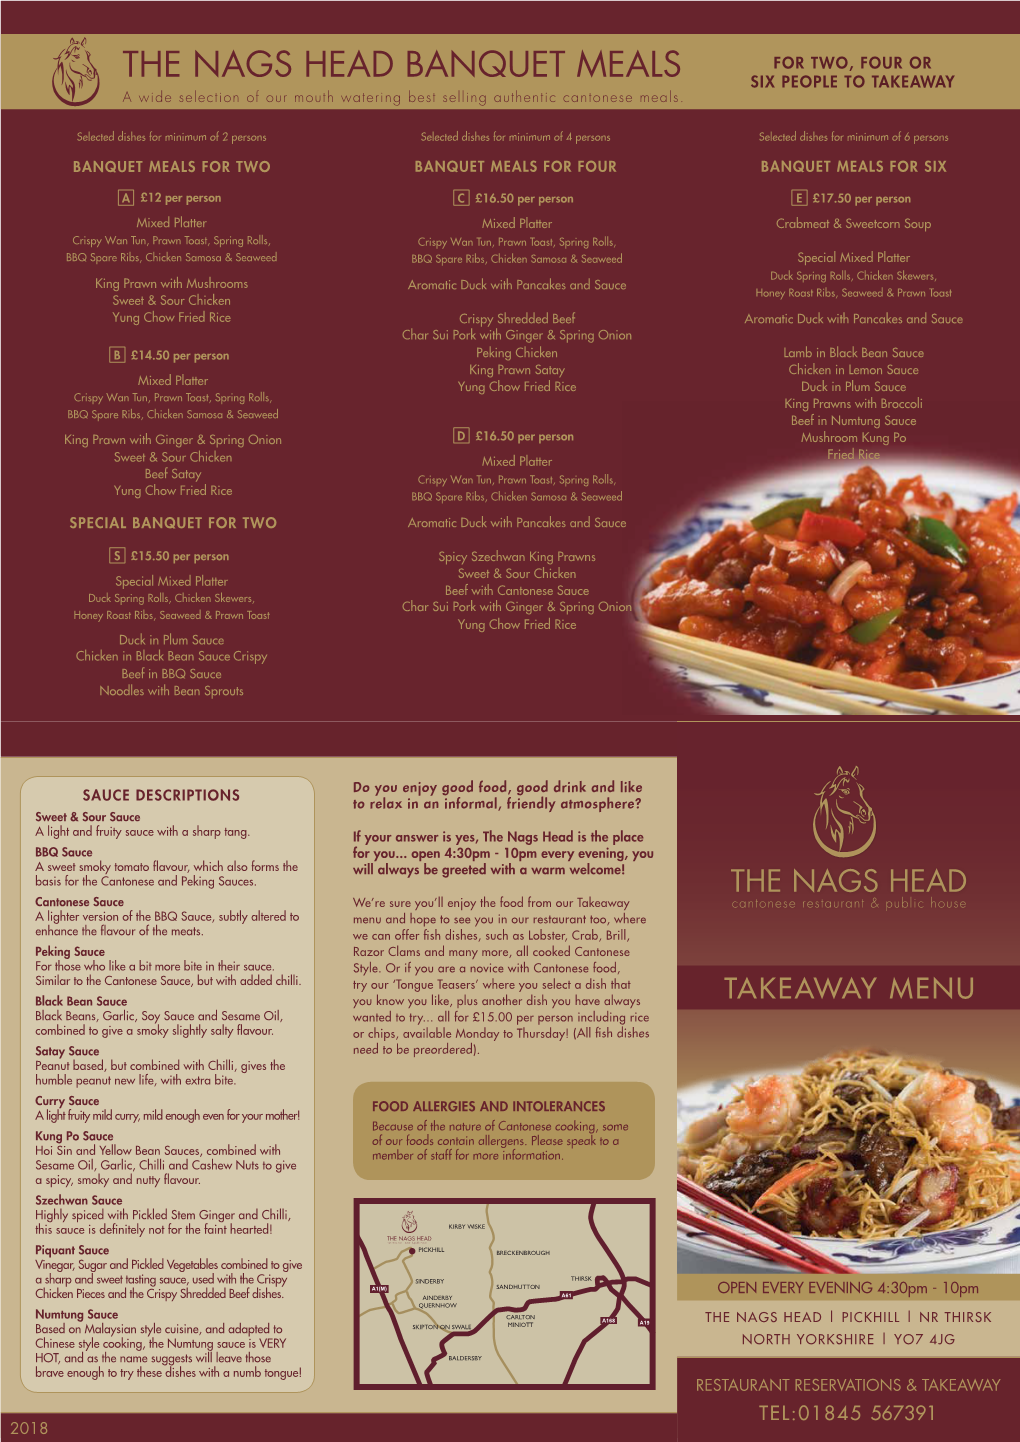 THE NAGS HEAD BANQUET MEALS SIX PEOPLE to TAKEAWAY a Wide Selection of Our Mouth Watering Best Selling Authentic Cantonese Meals